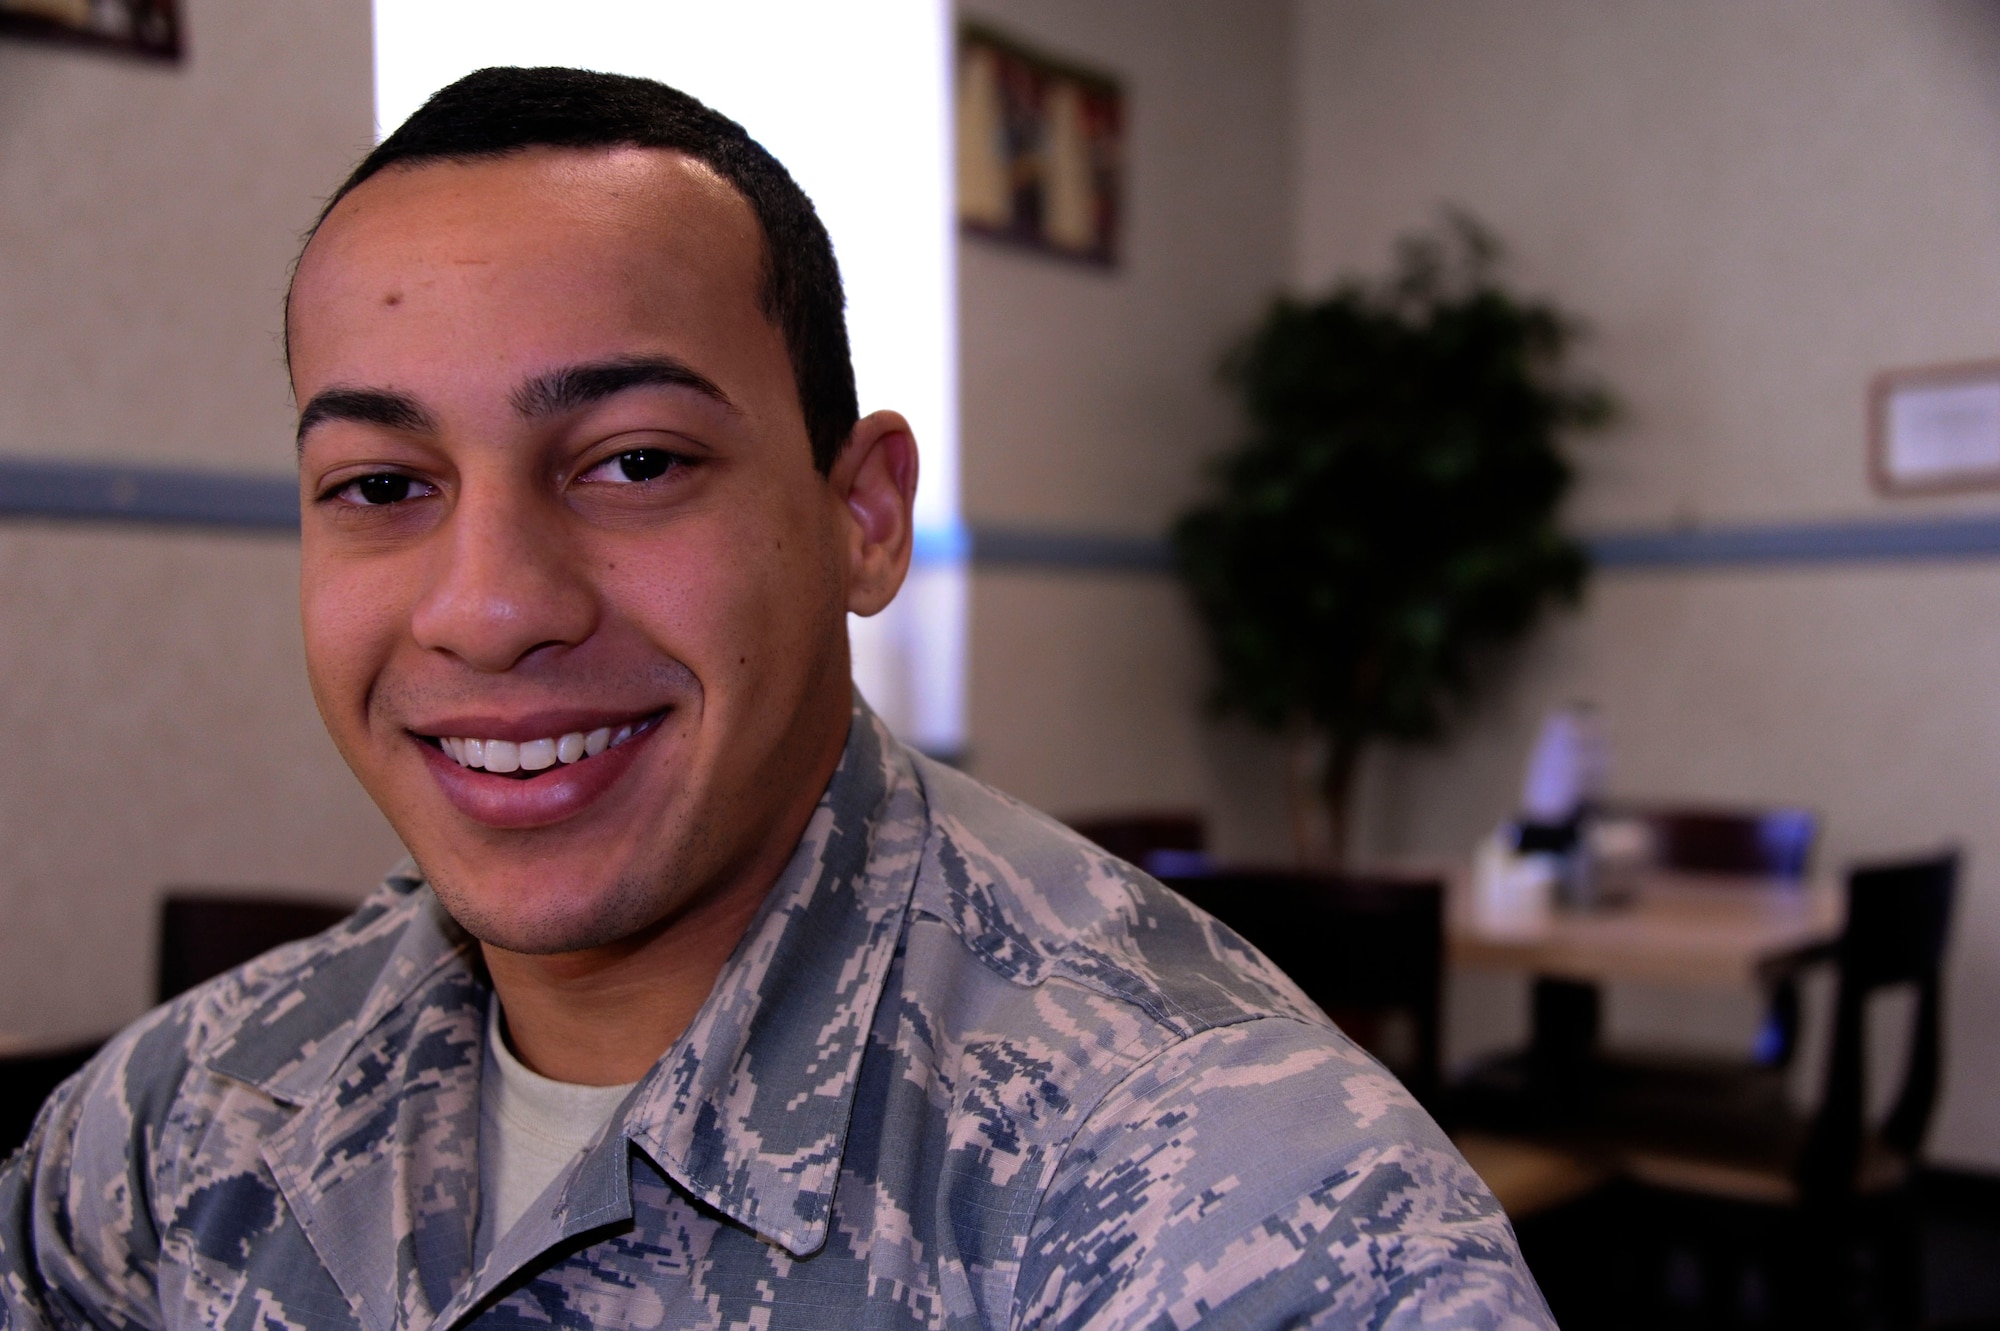 Airman Jaide Francis, Air Command and Staff College administrator, stops by the River Front Inn dining facility during his lunch break at Maxwell Air Force Base, Alabama, Feb. 27, 2015. Francis is from Florida and says he thinks the Air Force is ‘great’ and provides a lot of benefits. (U.S. Air Force photo by Airman 1st Class Alexa Culbert/Cleared)